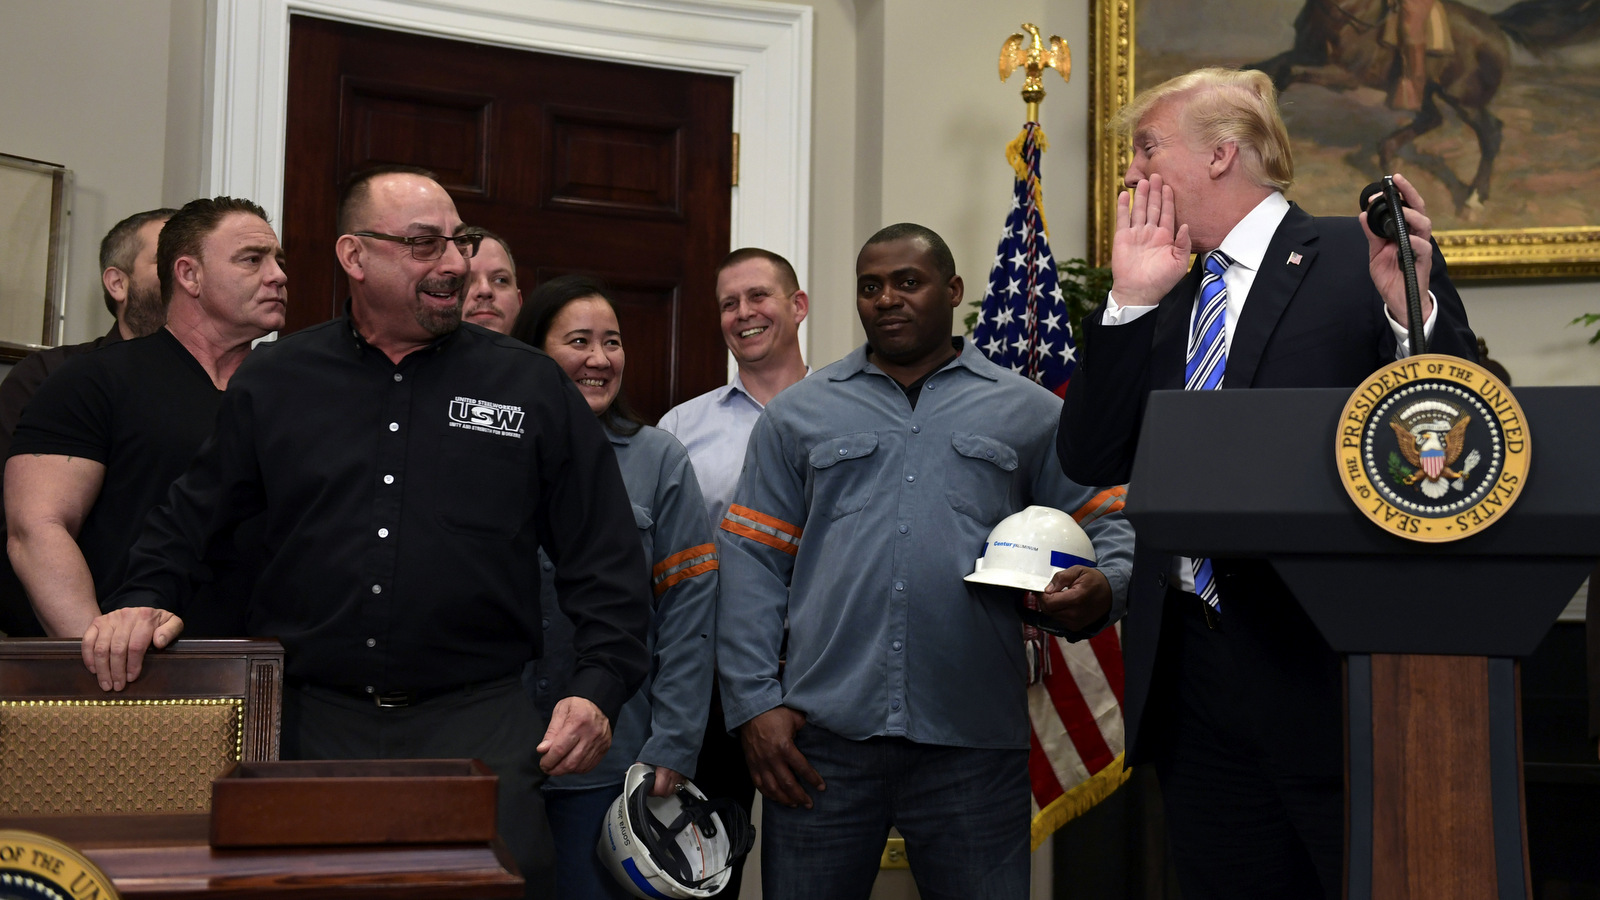 President Donald Trump, right, talks to Scott Sauritch, a maintenance worker at Irvin Works and President of Local 2227, during an event in the Roosevelt Room of the White House in Washington, Thursday, March 8, 2018. Trump signed two proclamations, one on steel imports and the other on aluminum imports. Susan Walsh | AP